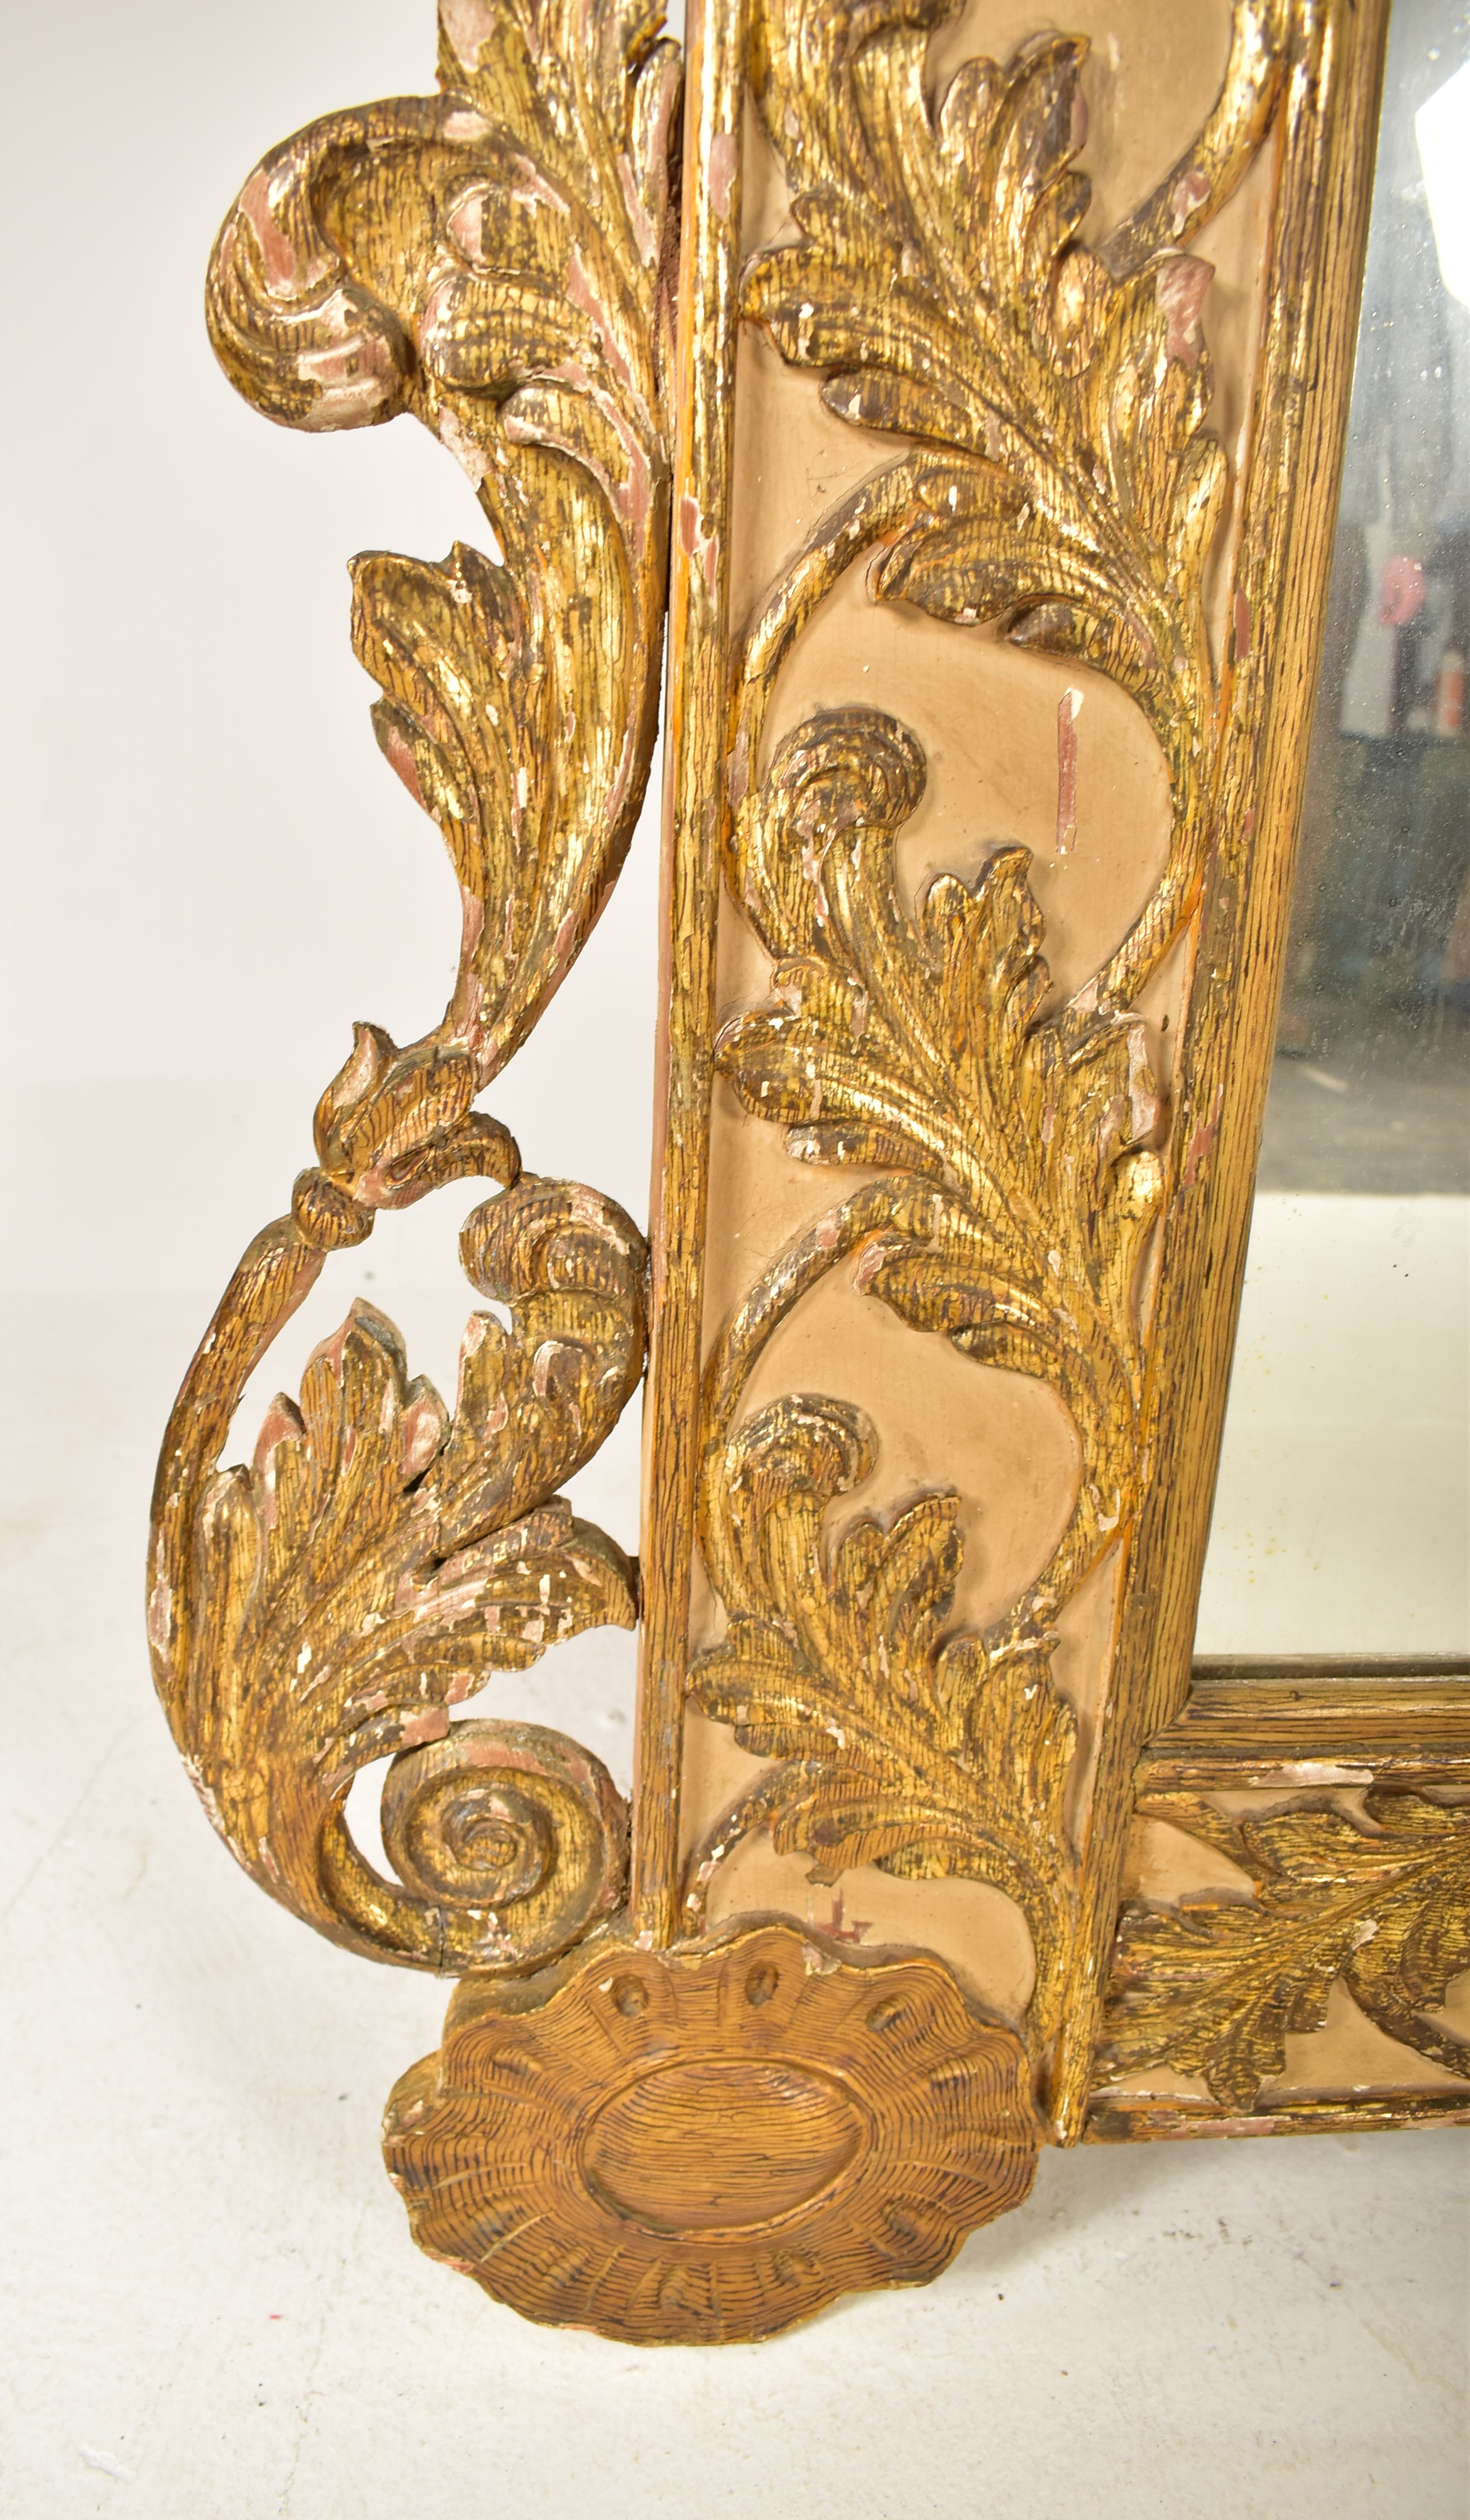 19TH CENTURY CONTINENTAL ROCOCO STYLE GILT WOOD MIRROR - Image 3 of 7